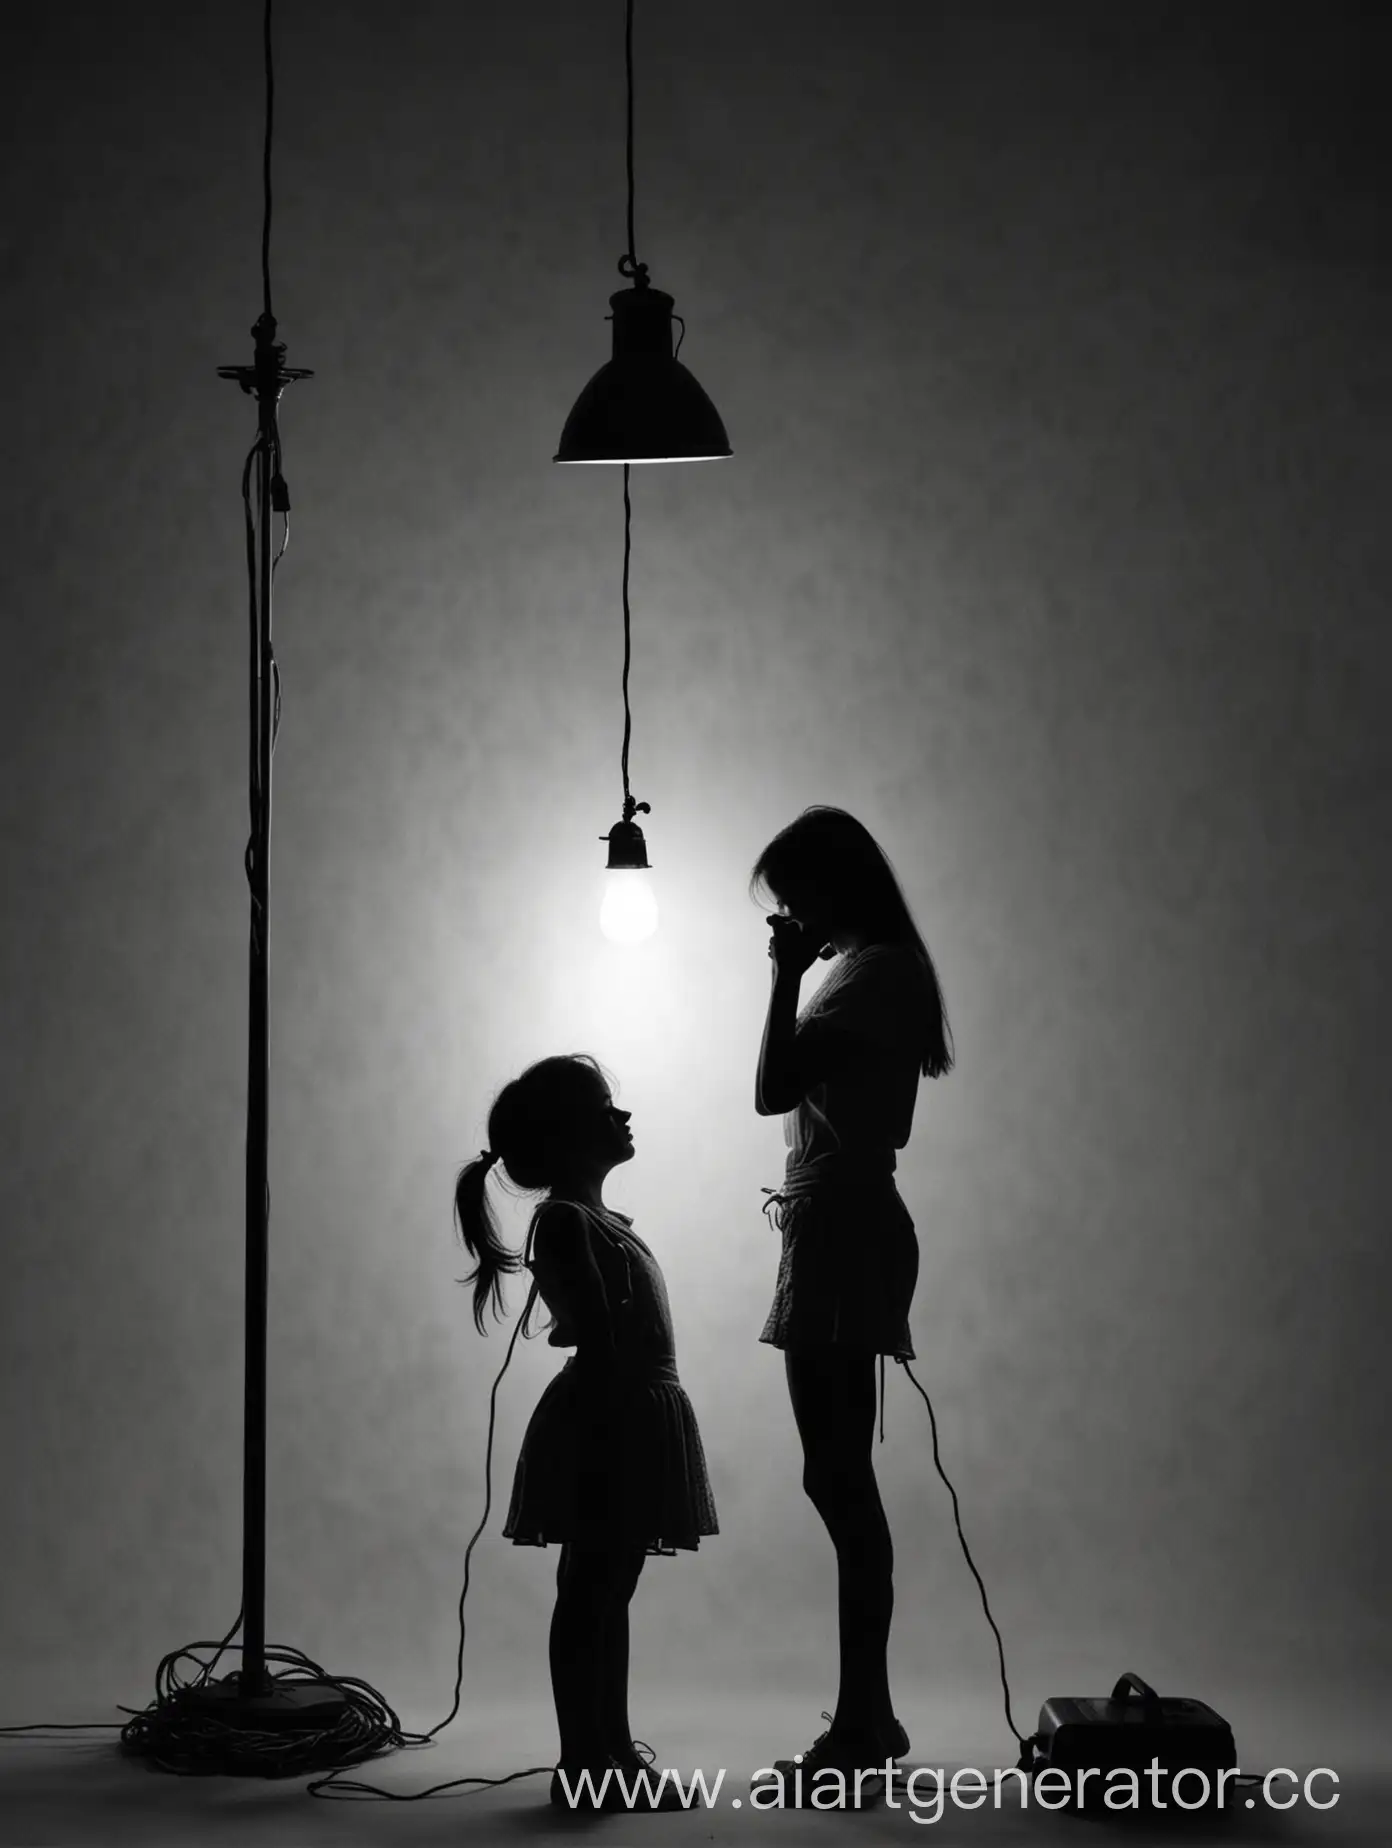 Silhouette-of-Thoughtful-Girl-Contemplating-Lamp-Light